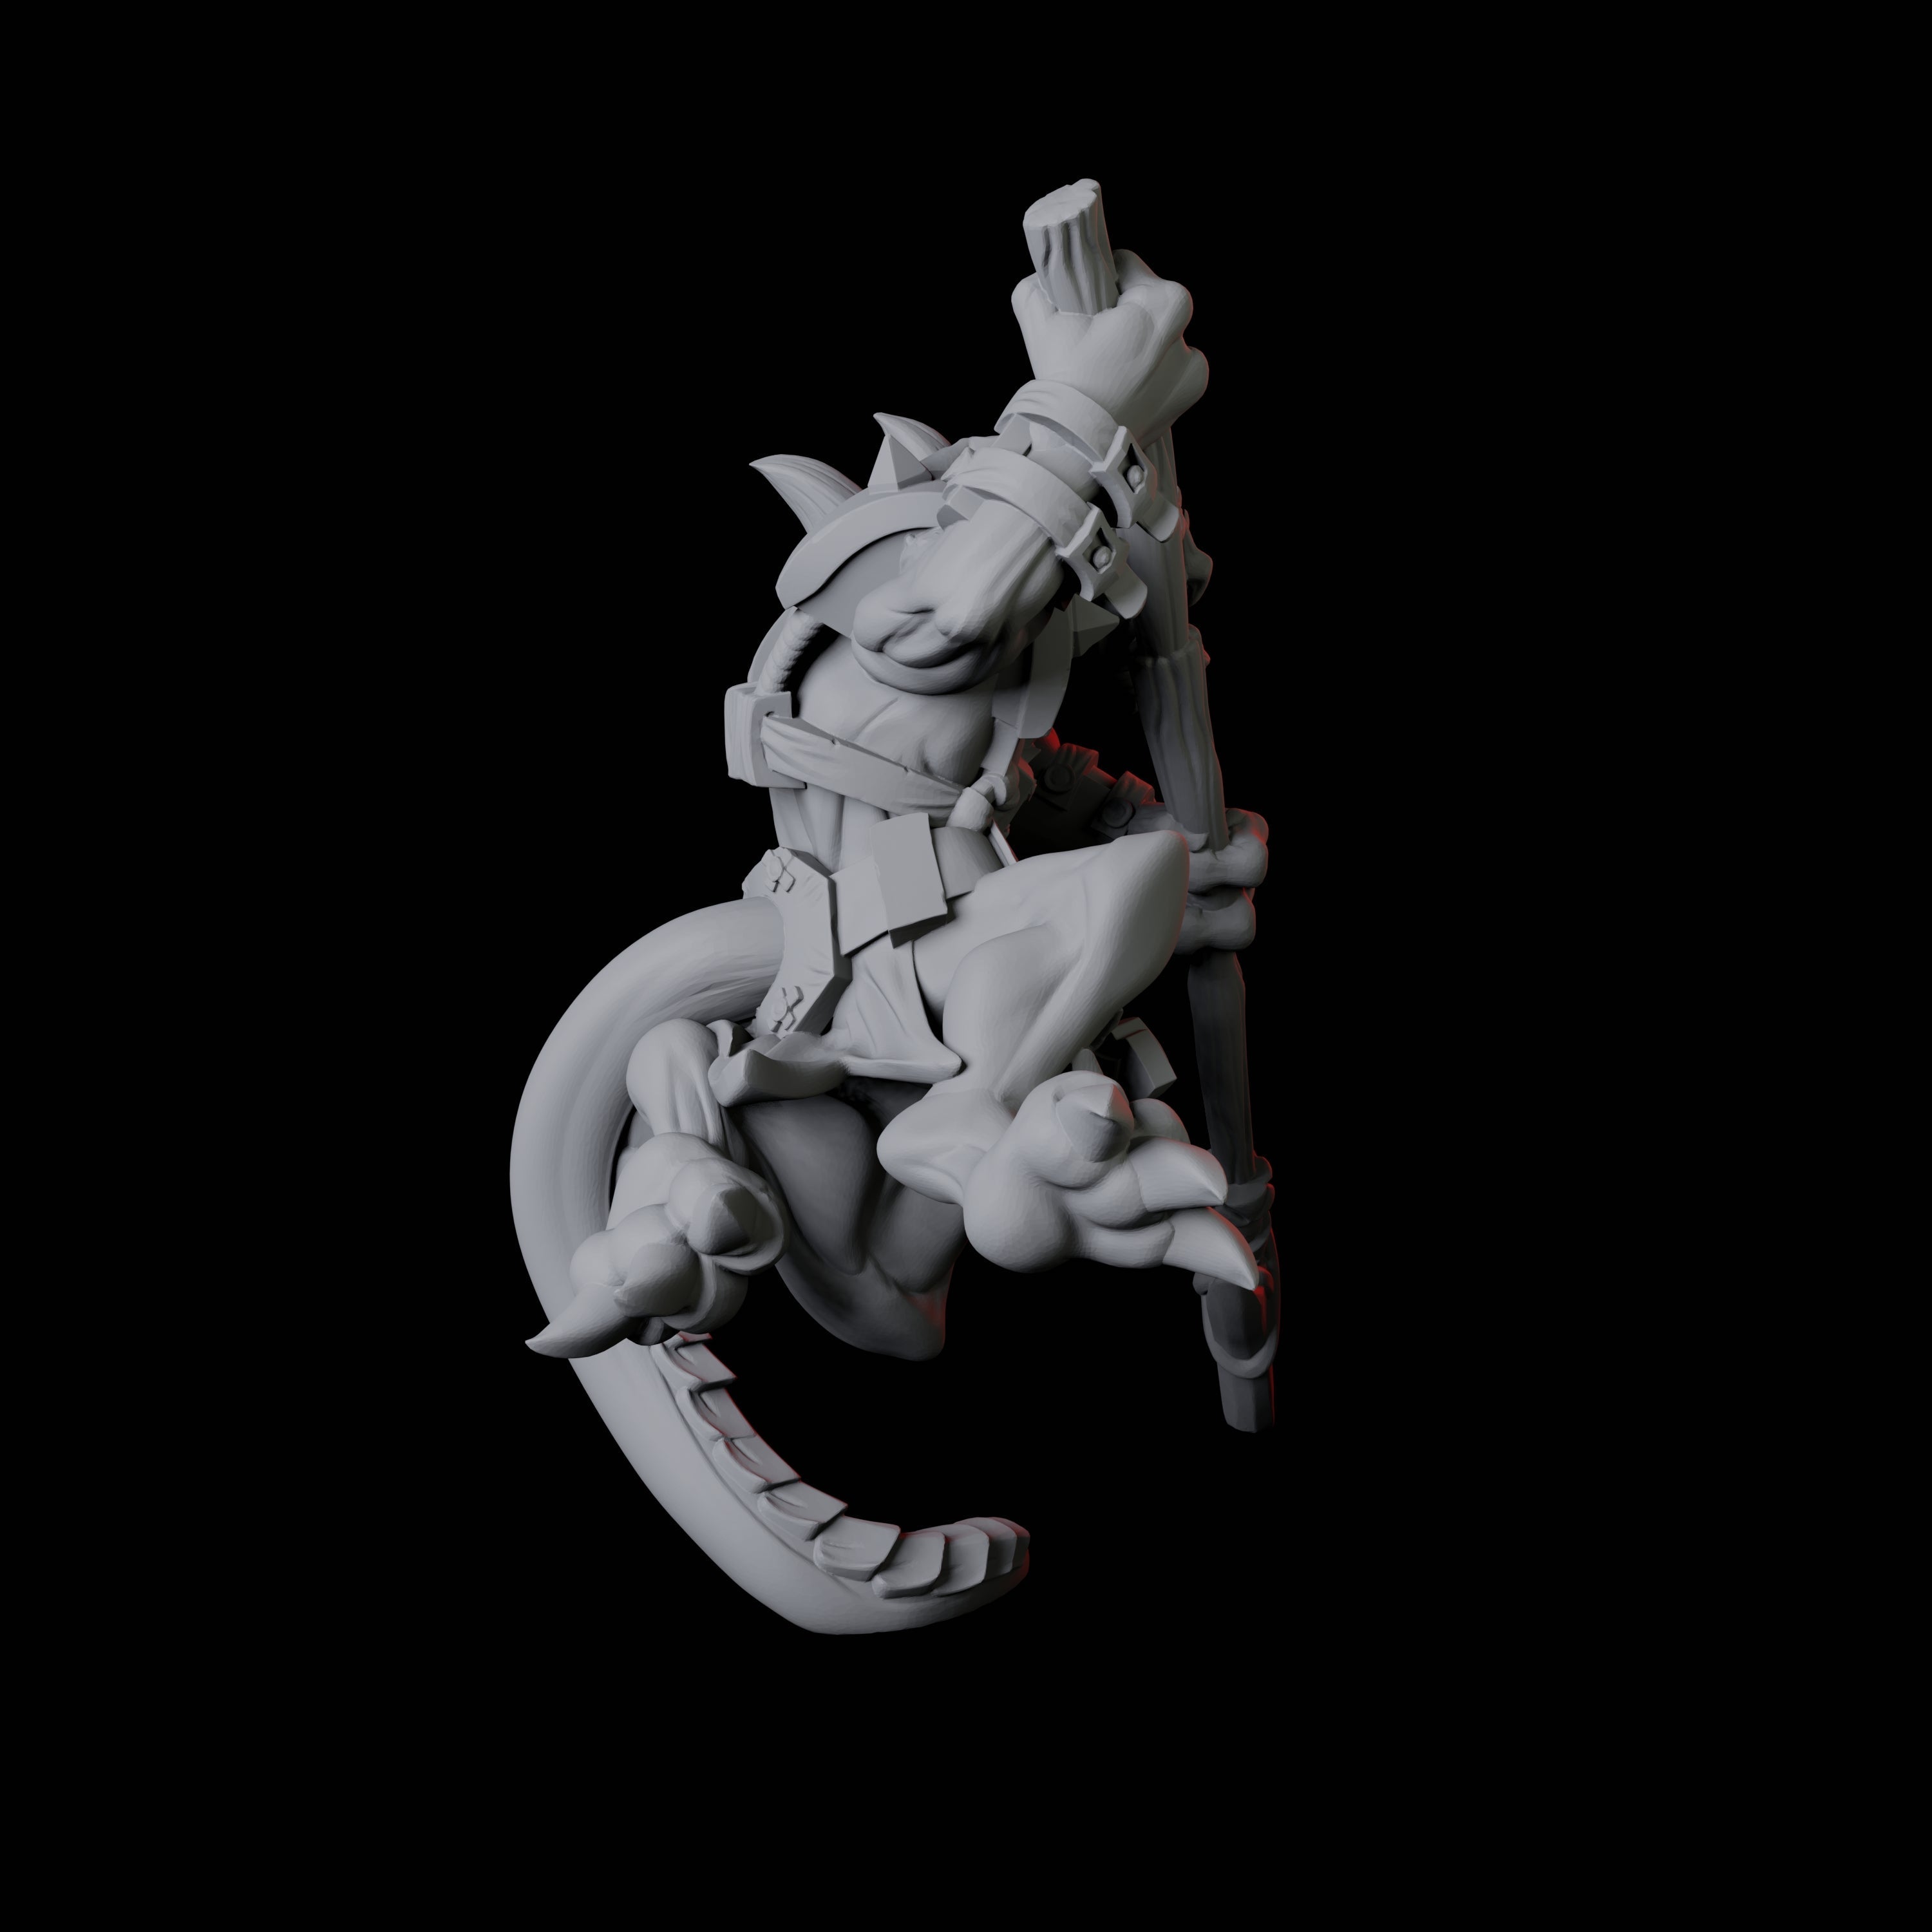 Kobold Ranger D Miniature for Dungeons and Dragons, Pathfinder or other TTRPGs